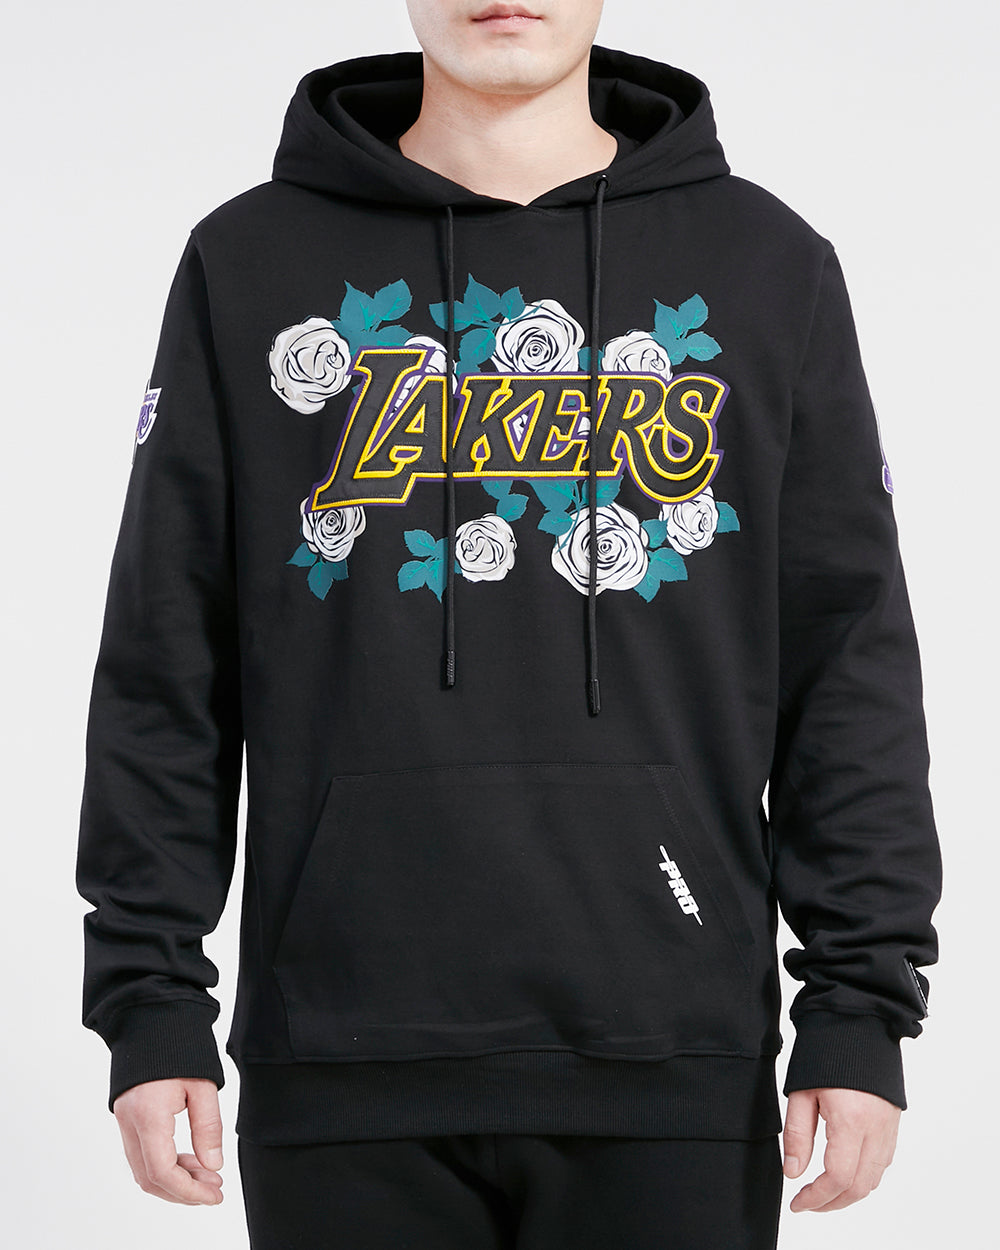 Mitchell & Ness Women's Los Angeles Lakers Black City Joggers